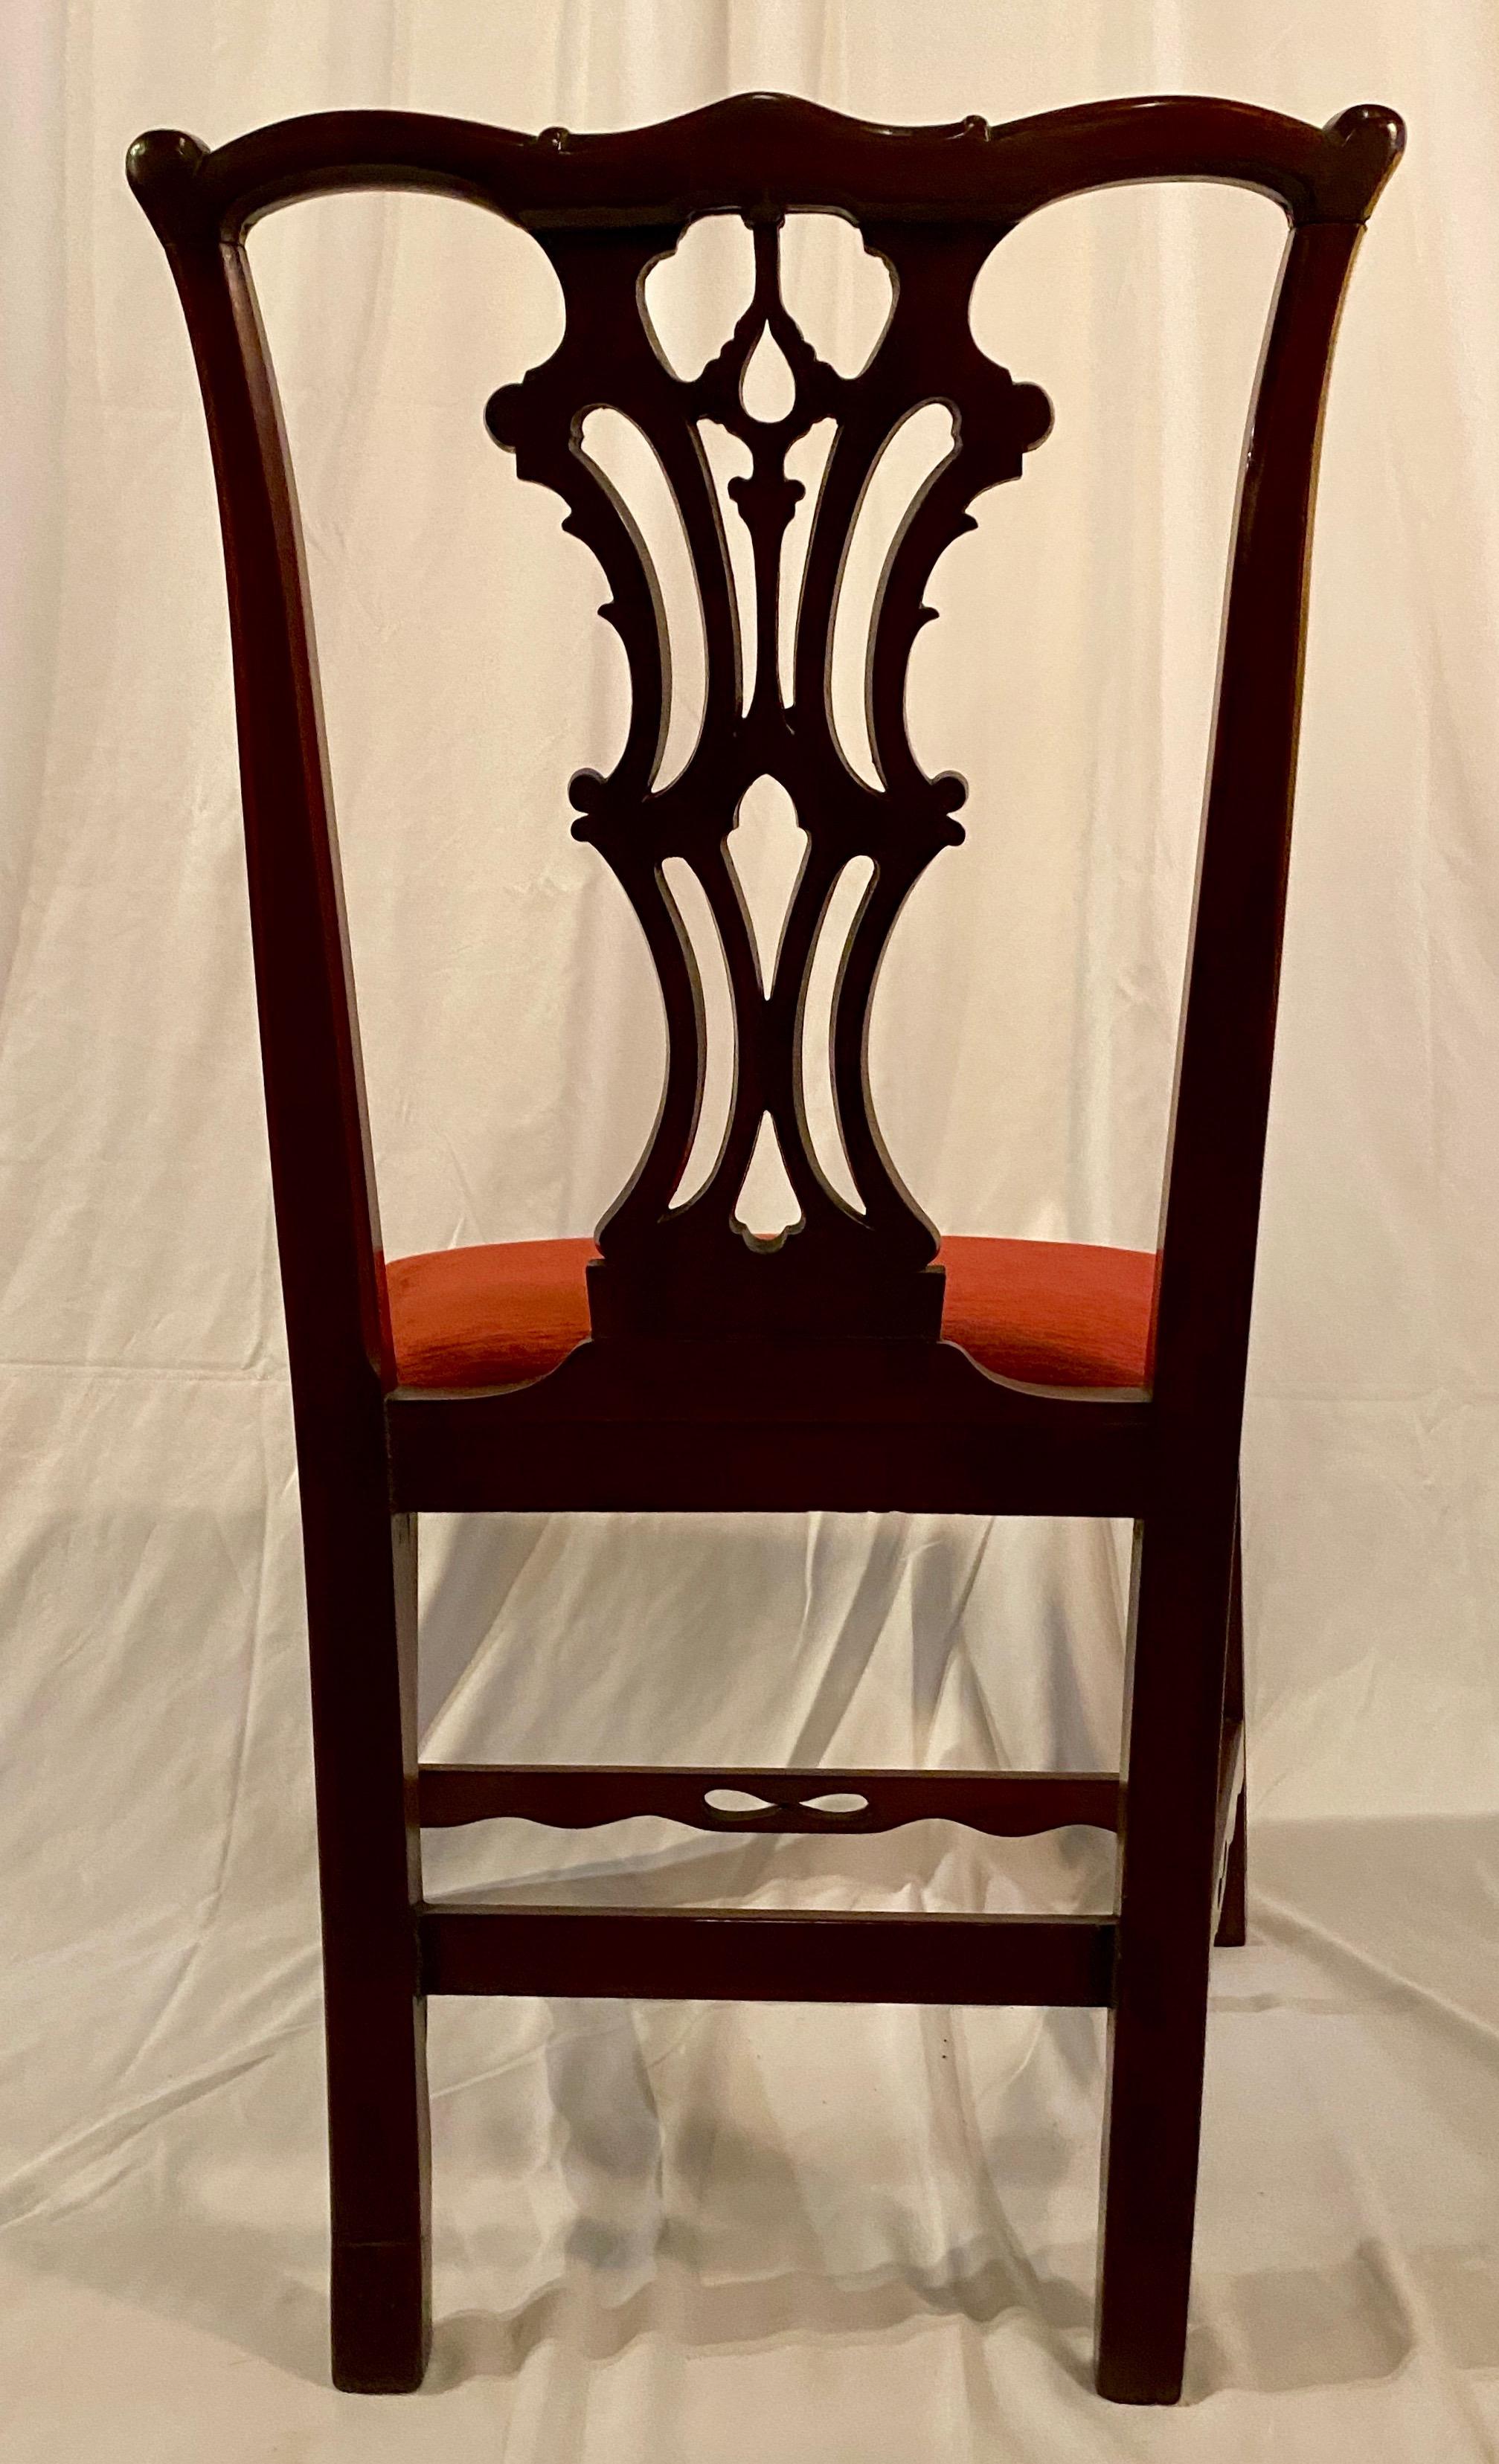 Ancienne chaise anglaise en acajou Design/One Chippendale, vers 1870-1880
